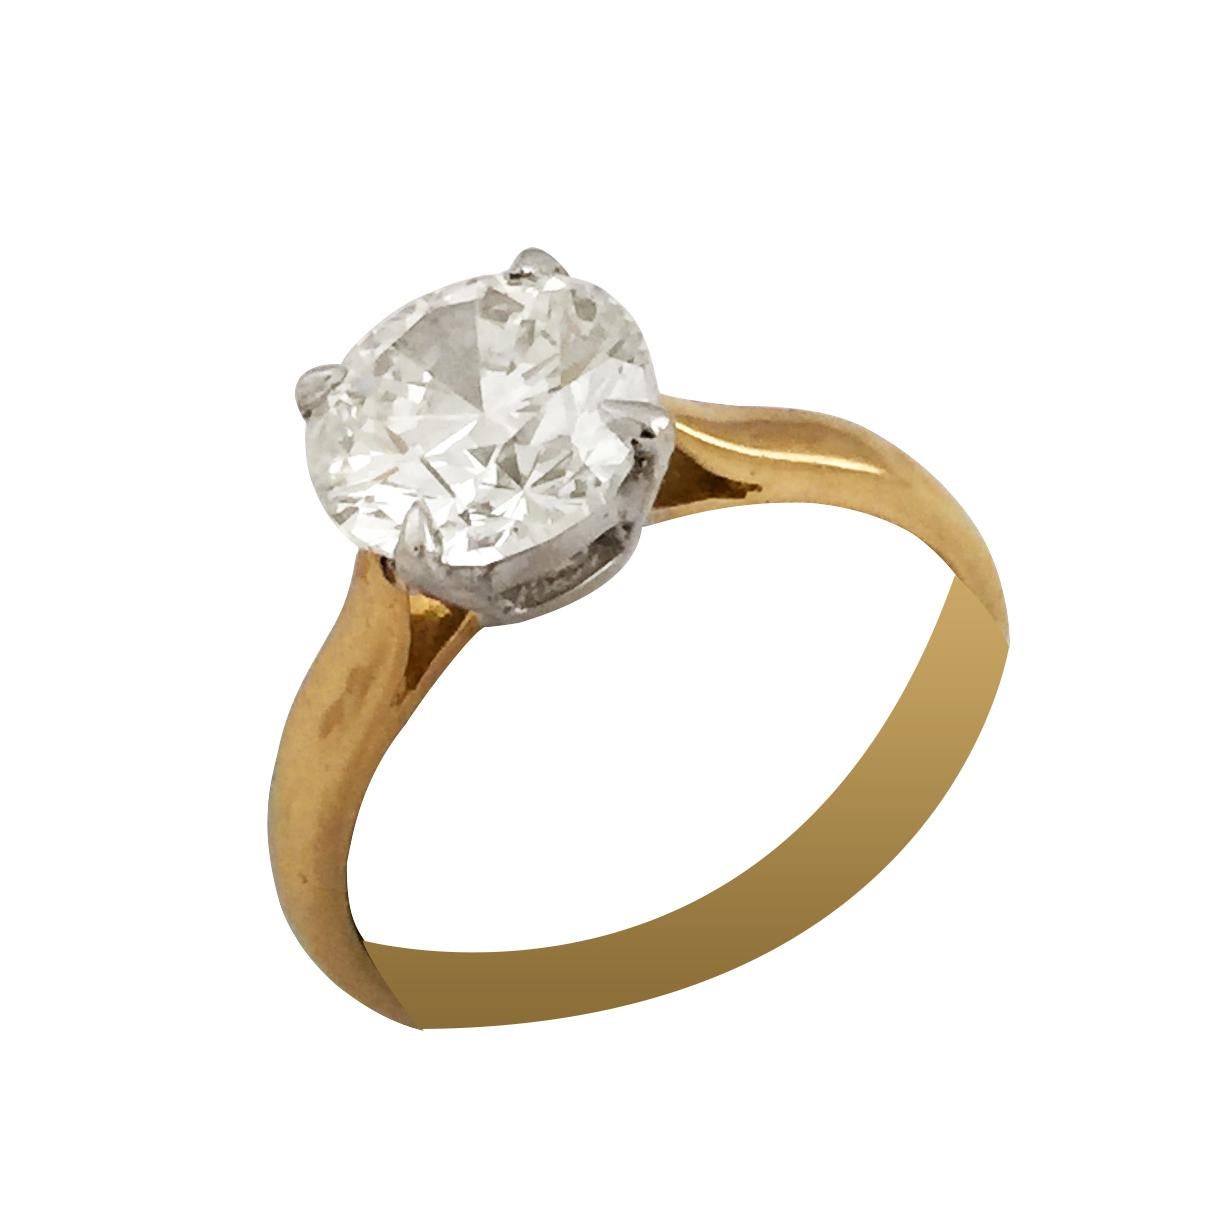 750/00 Yellow gold ring with a 2.01 carat brilliant-cut diamond prong setting in a white gold basket.
Quality of the brilliant : E - VS1 with a GIA certificate.
Weight : 3.13 grams
